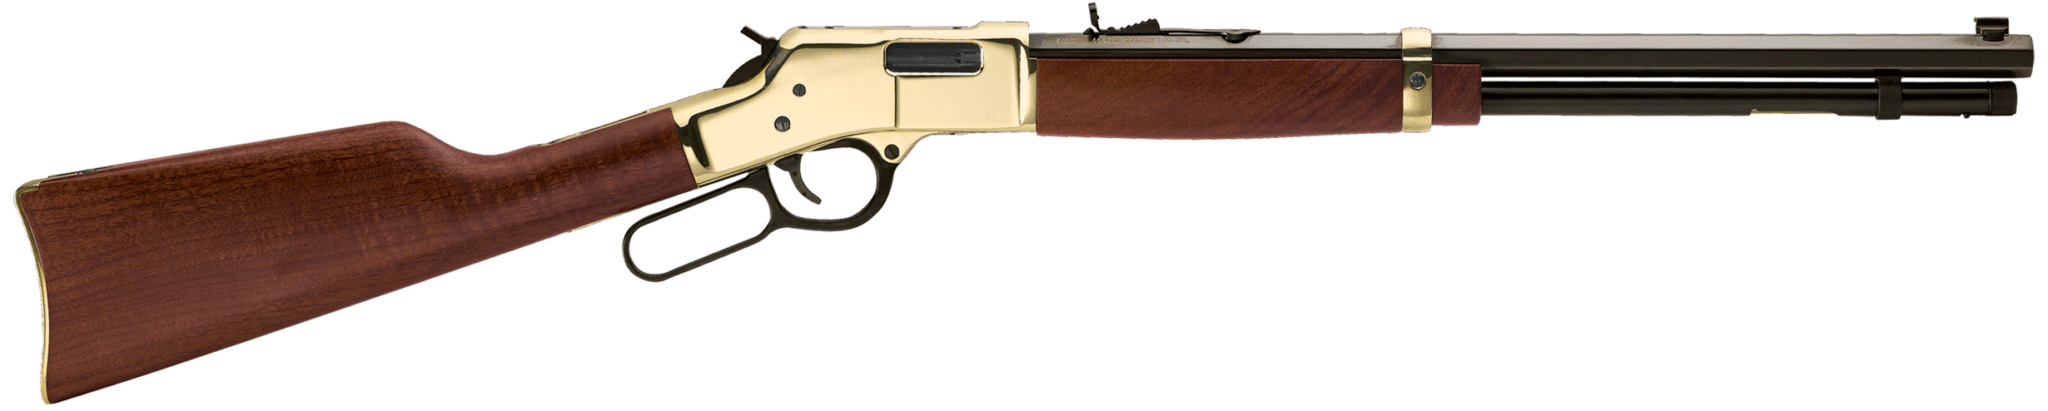 NEW Henry Big Boy Lever Action Rifle just $1050 out-the-door!